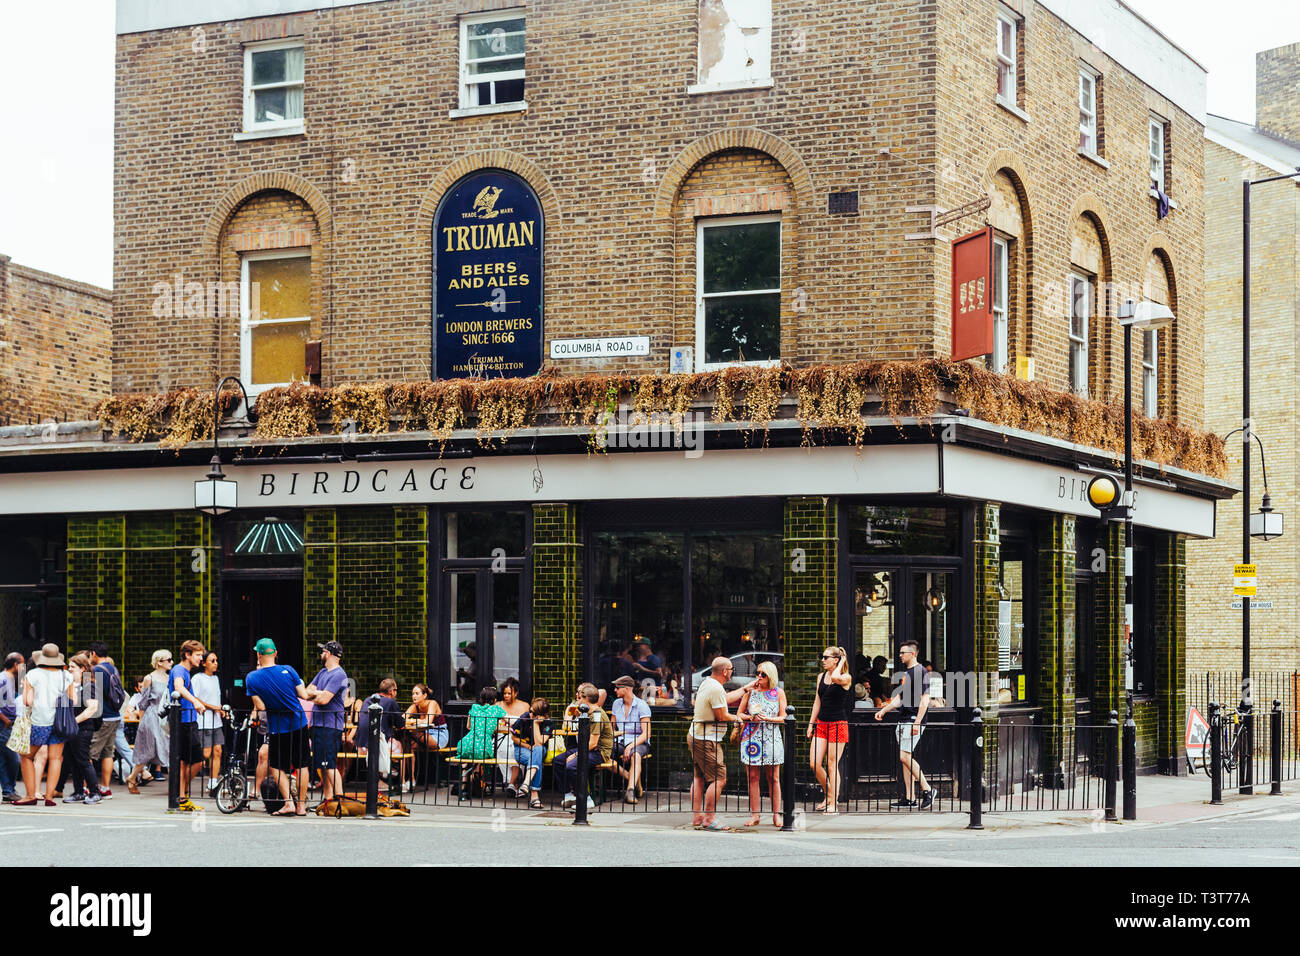 London/UK - July 21 2018: The Birdcage Pub on Columbia Road at the end of the flover market in the East London, UK. Stock Photo